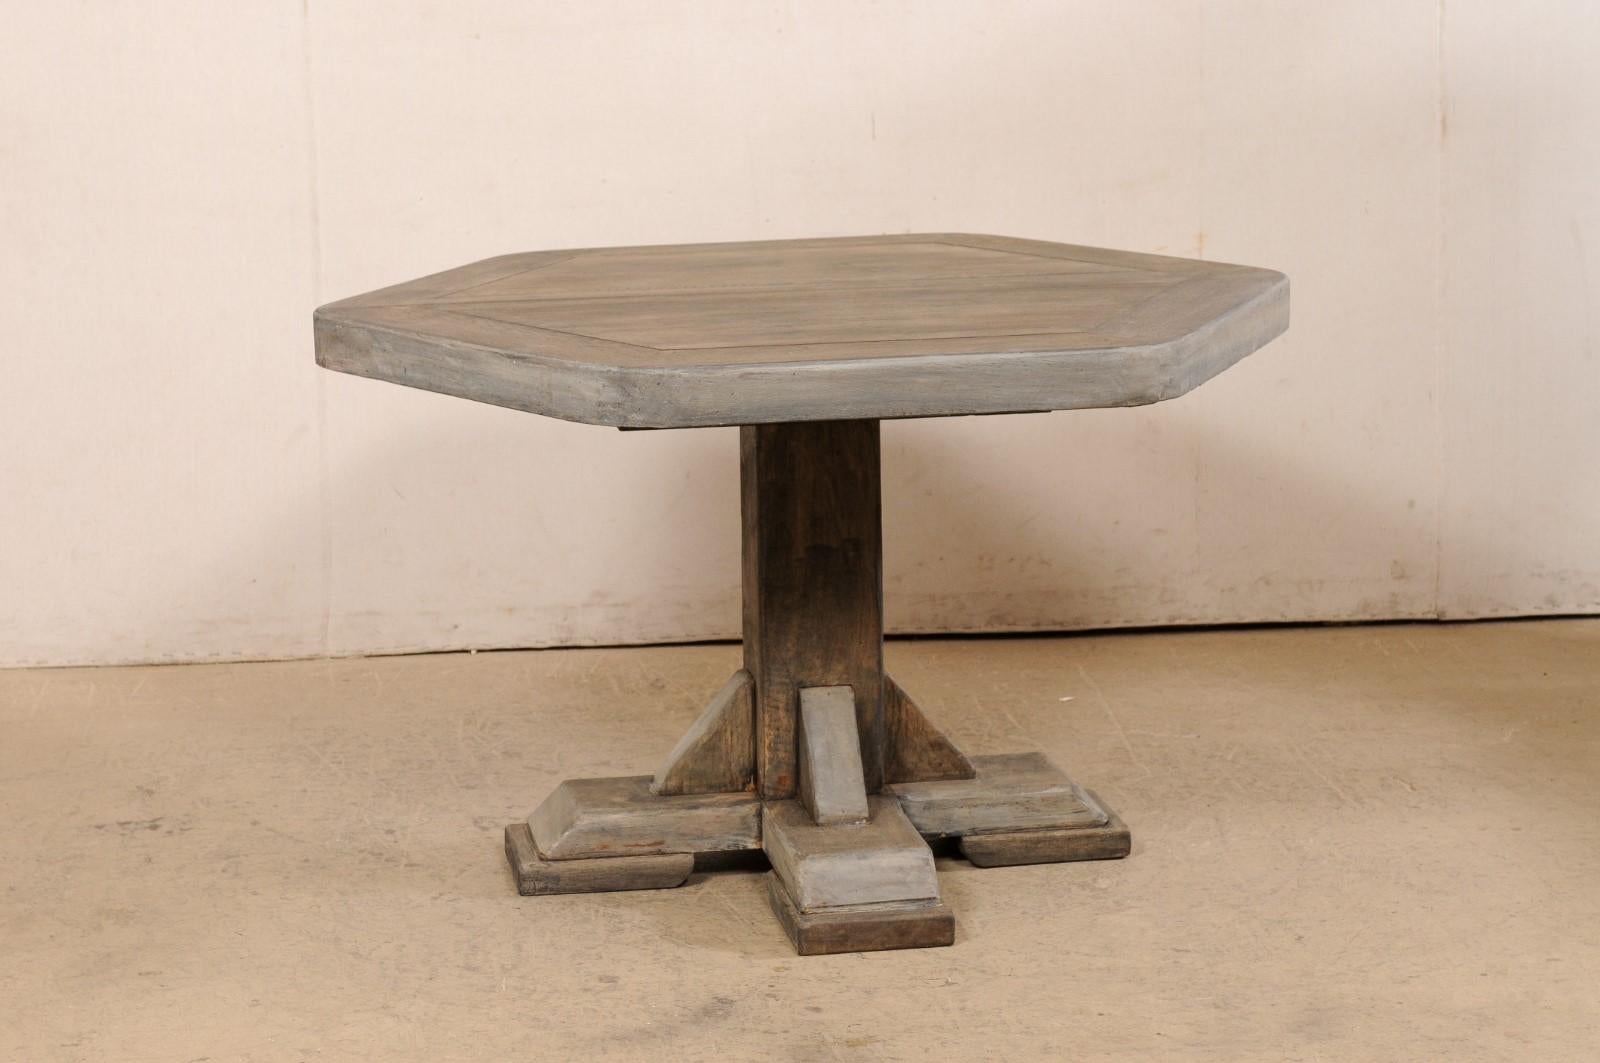 A European hexagonal wood table from the mid 20th century. This mid-century table from Europe has a 2.75